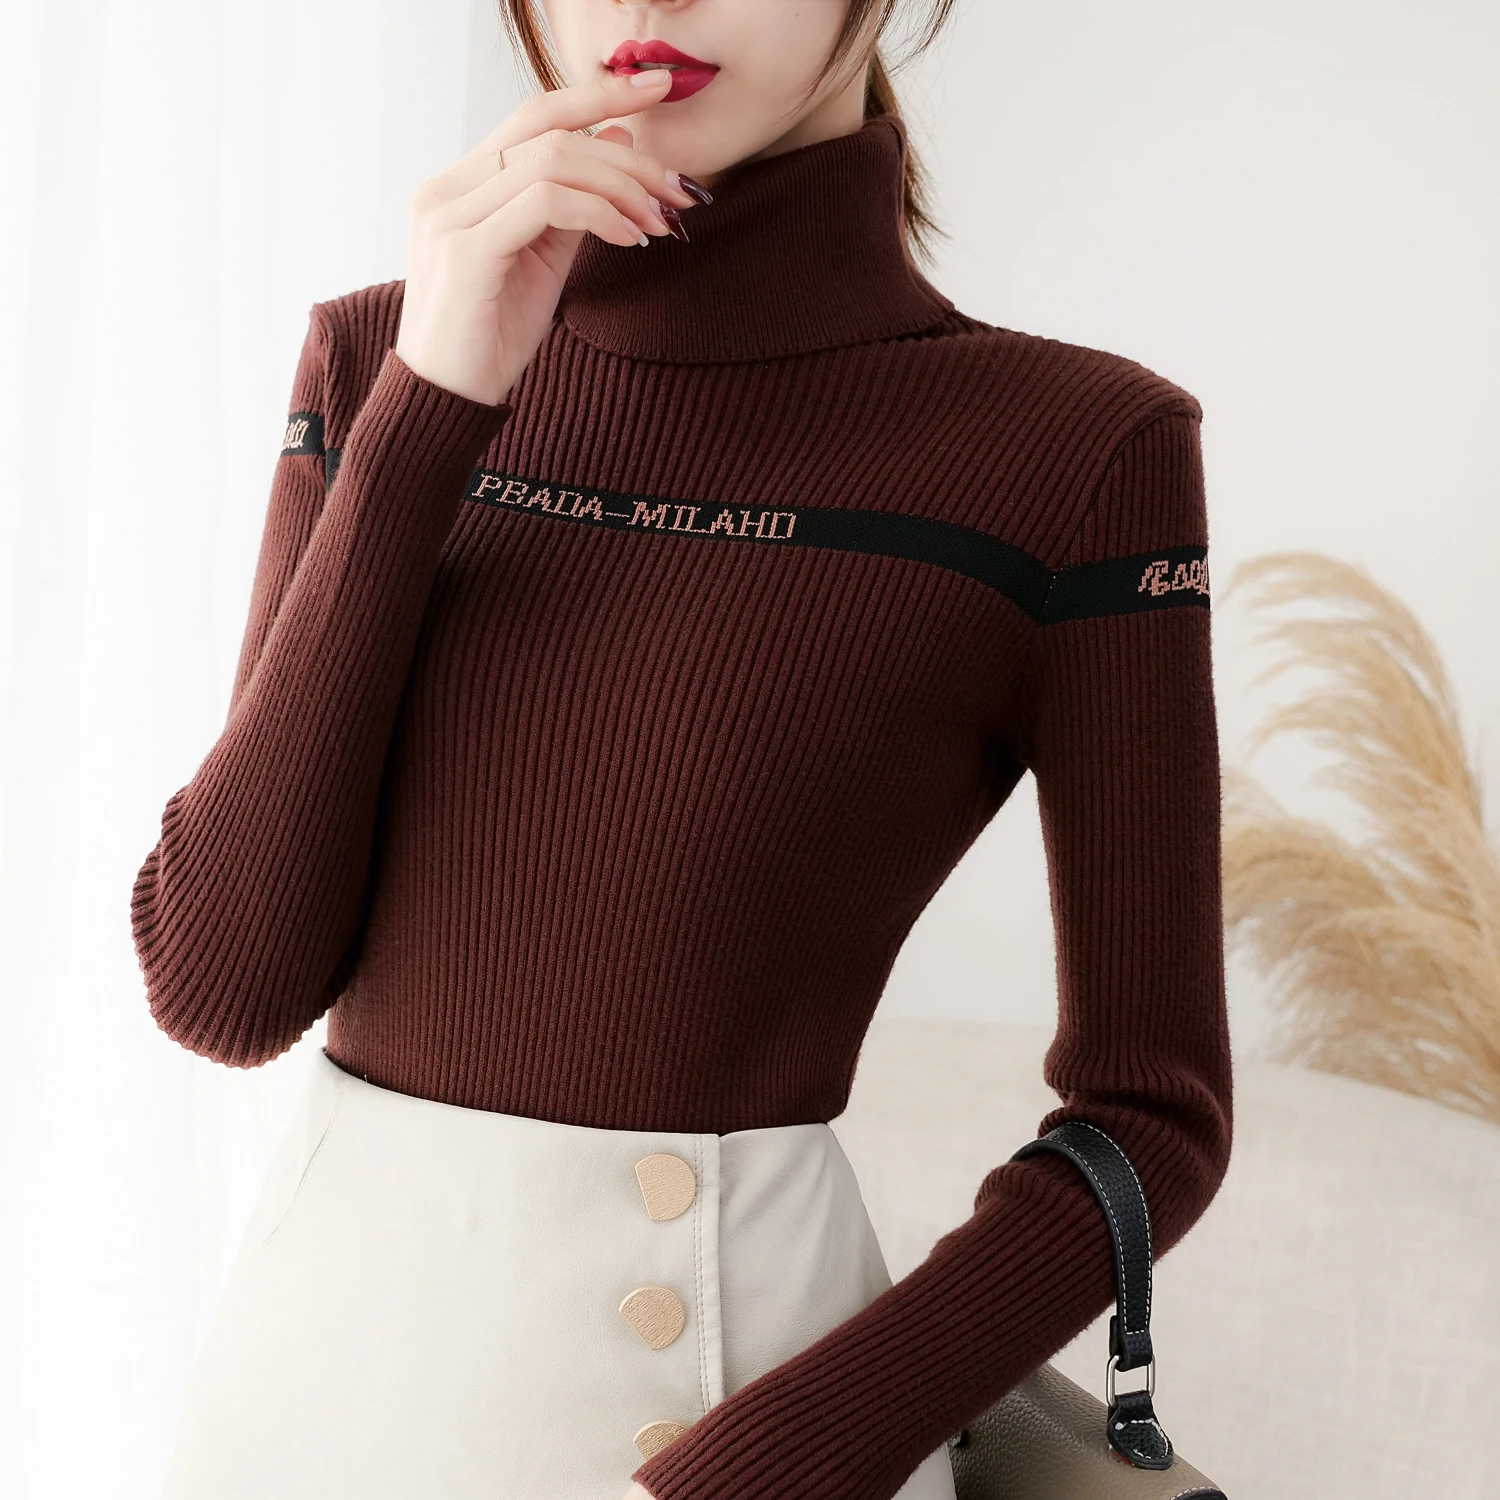 Women's Knitted sweaters Autumn Winter 2019 New Korean Casual High Collar Young girl Letters Long Sleeve Bottoming Top 202i60 | Женская